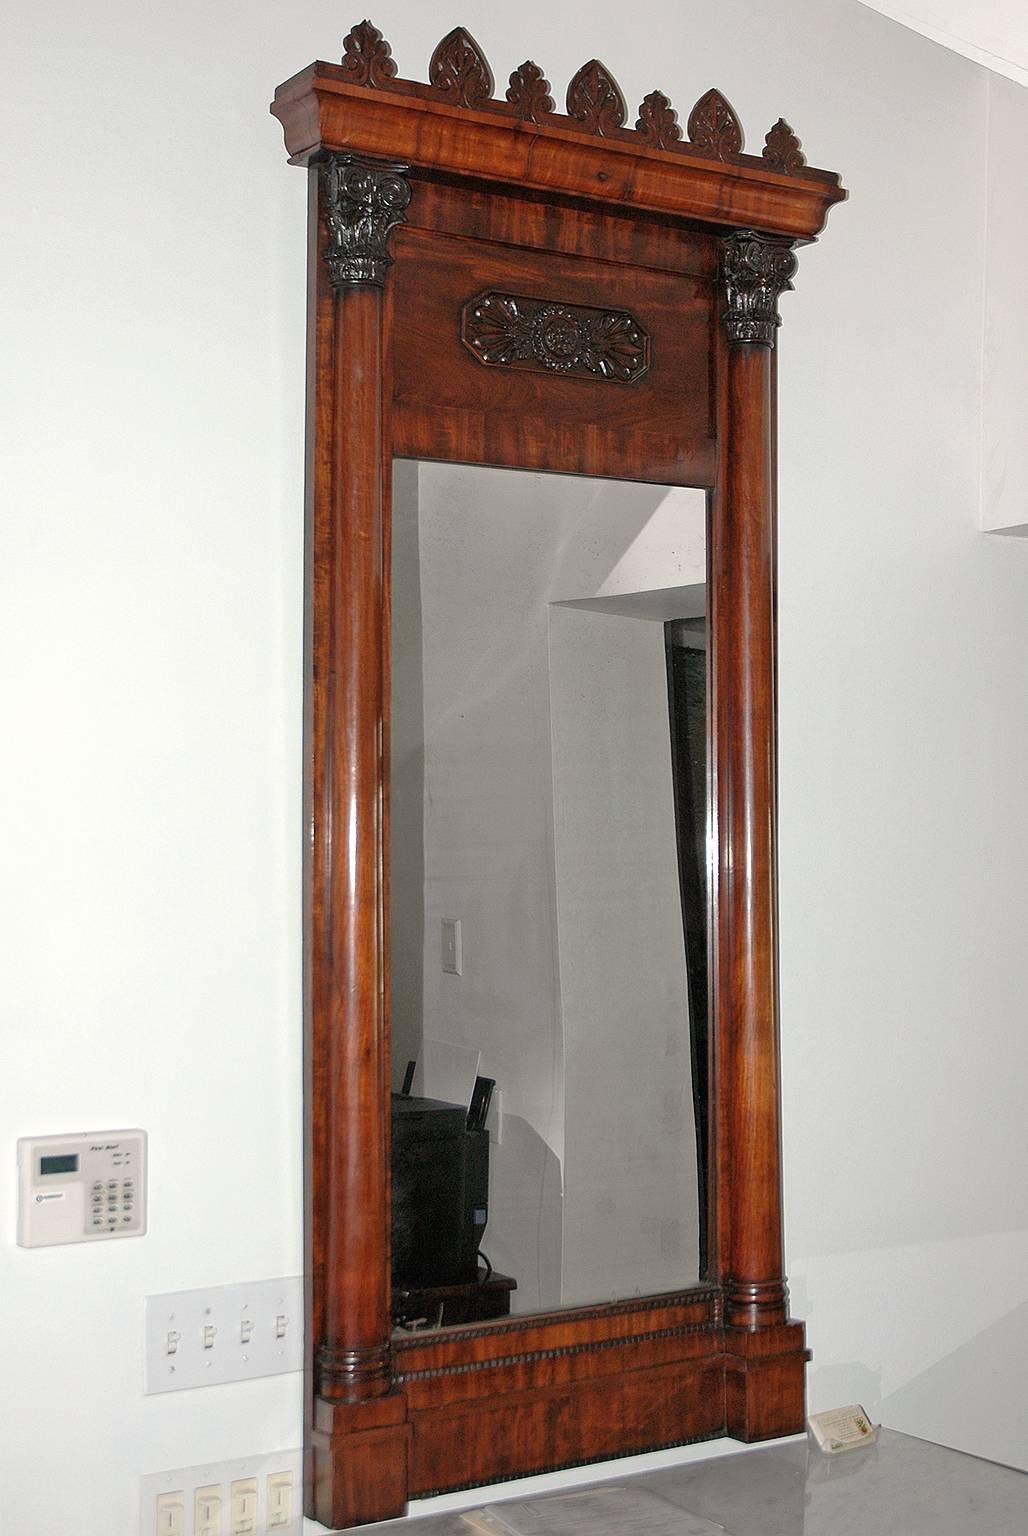 A very beautiful tall stately and elegant Empire mirror in fine Cuban mahogany with well-articulated carvings of anthemions as antefix decorating the crown molding. Turned columns with finely carved acanthus capitals flank the mirror & frieze.